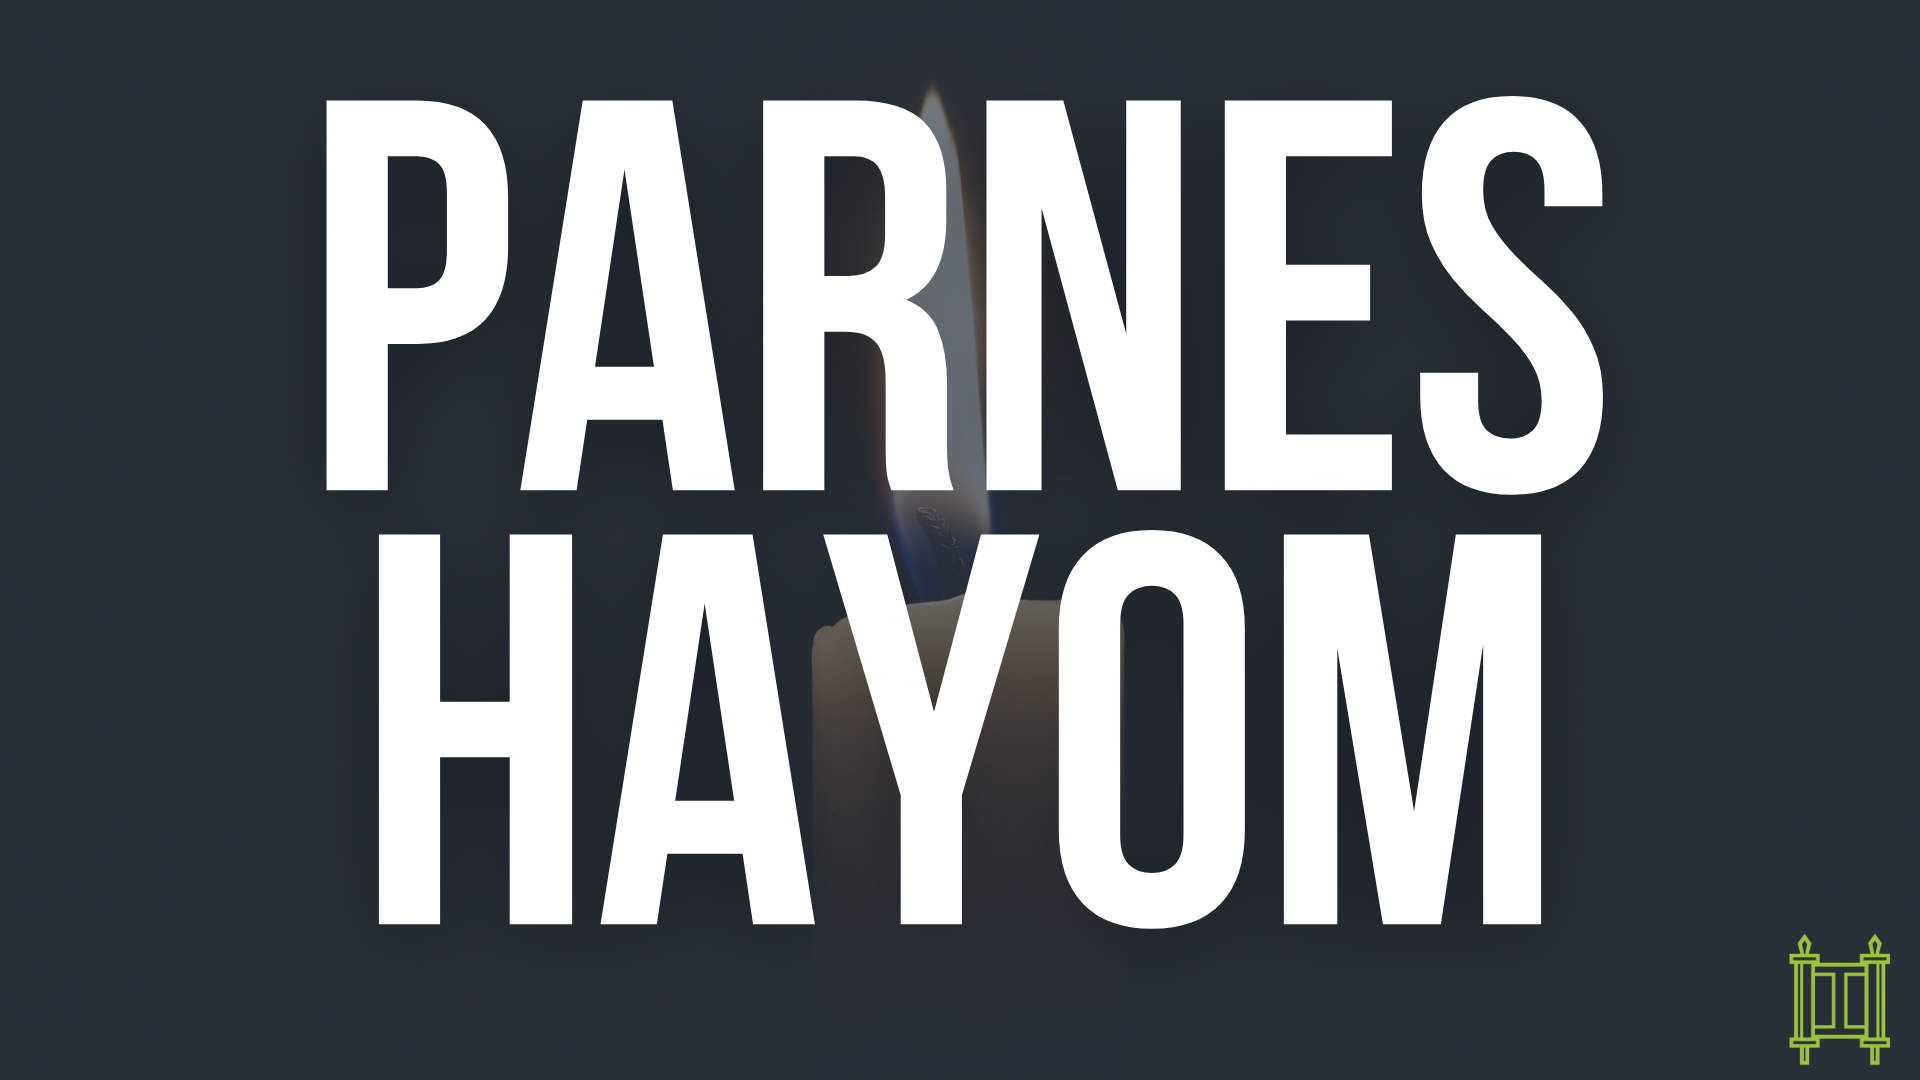 Parnes Hayom - Sponsor A Day Of Learning